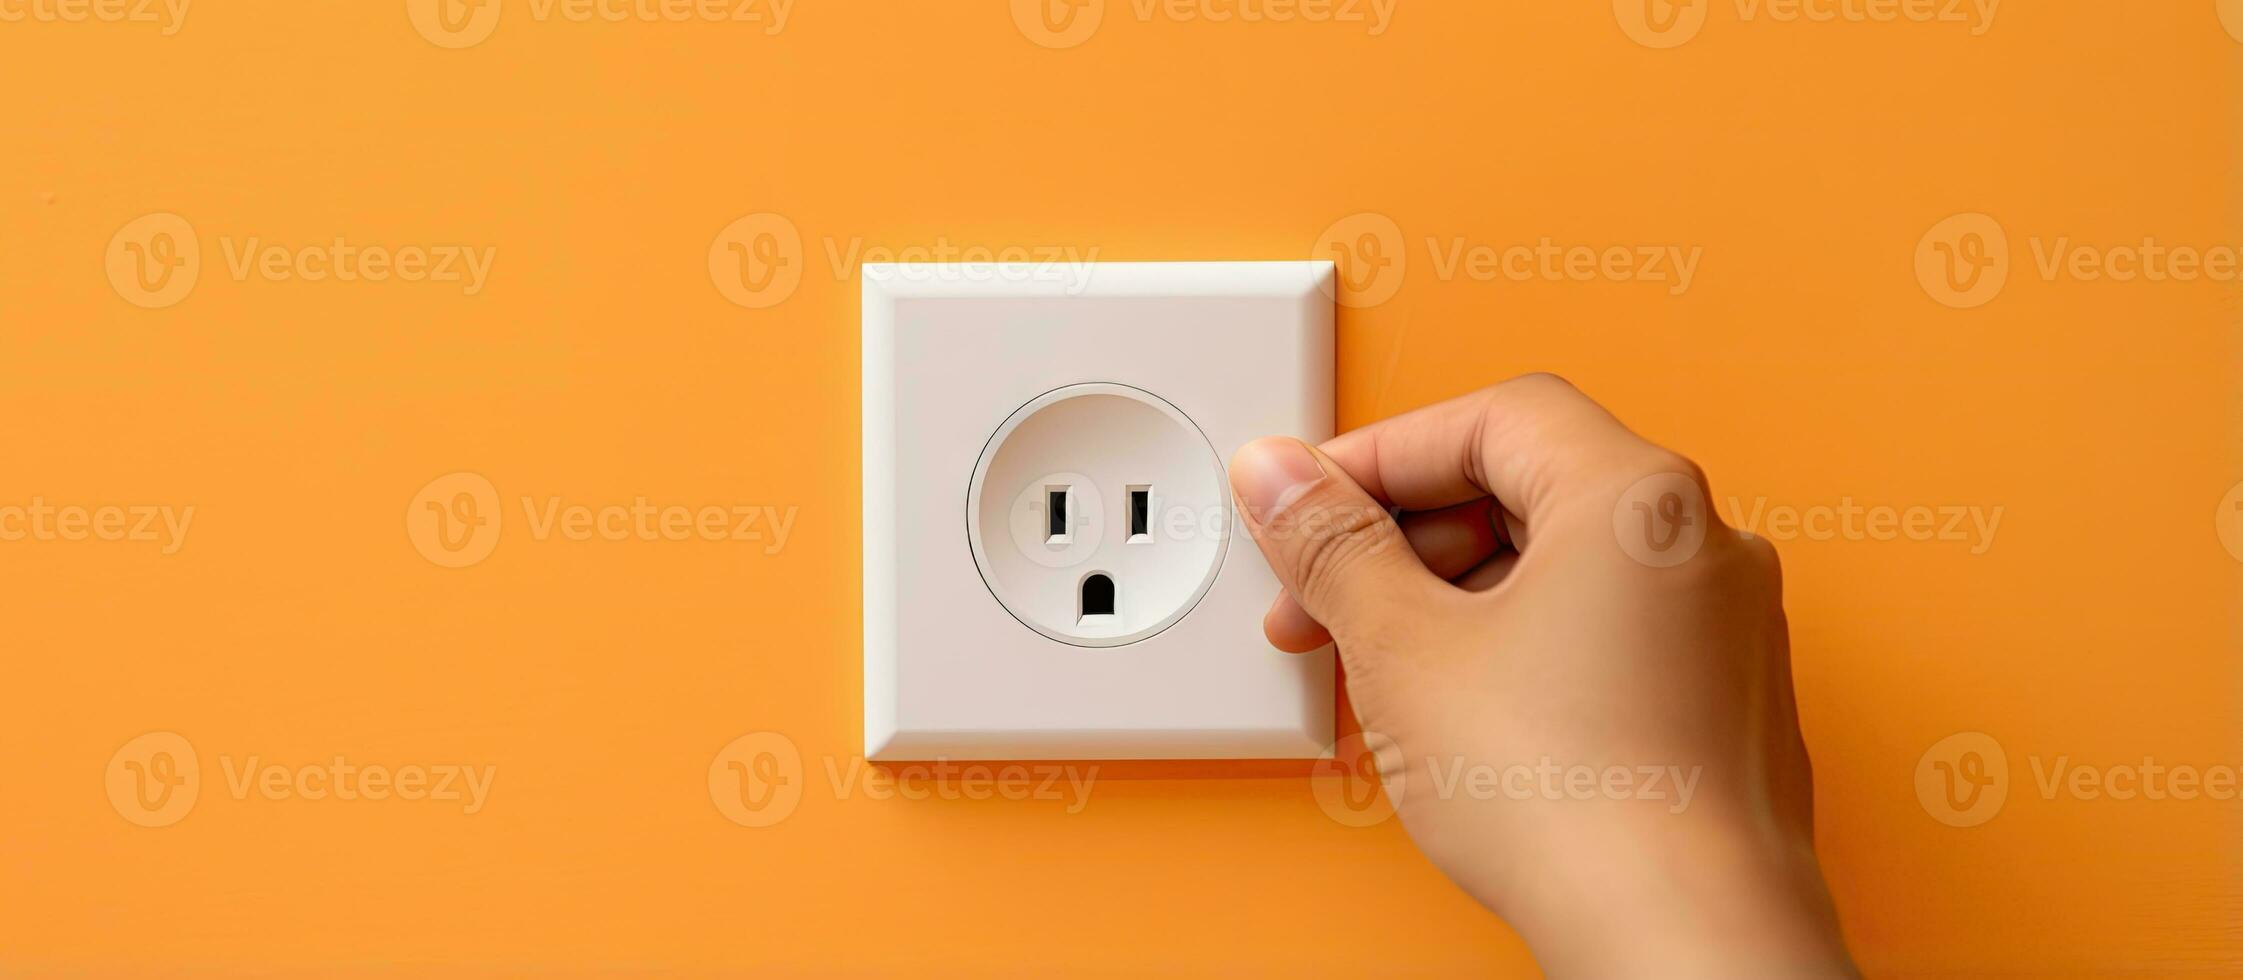 Connecting a plug to a wall outlet to conserve energy and save power photo